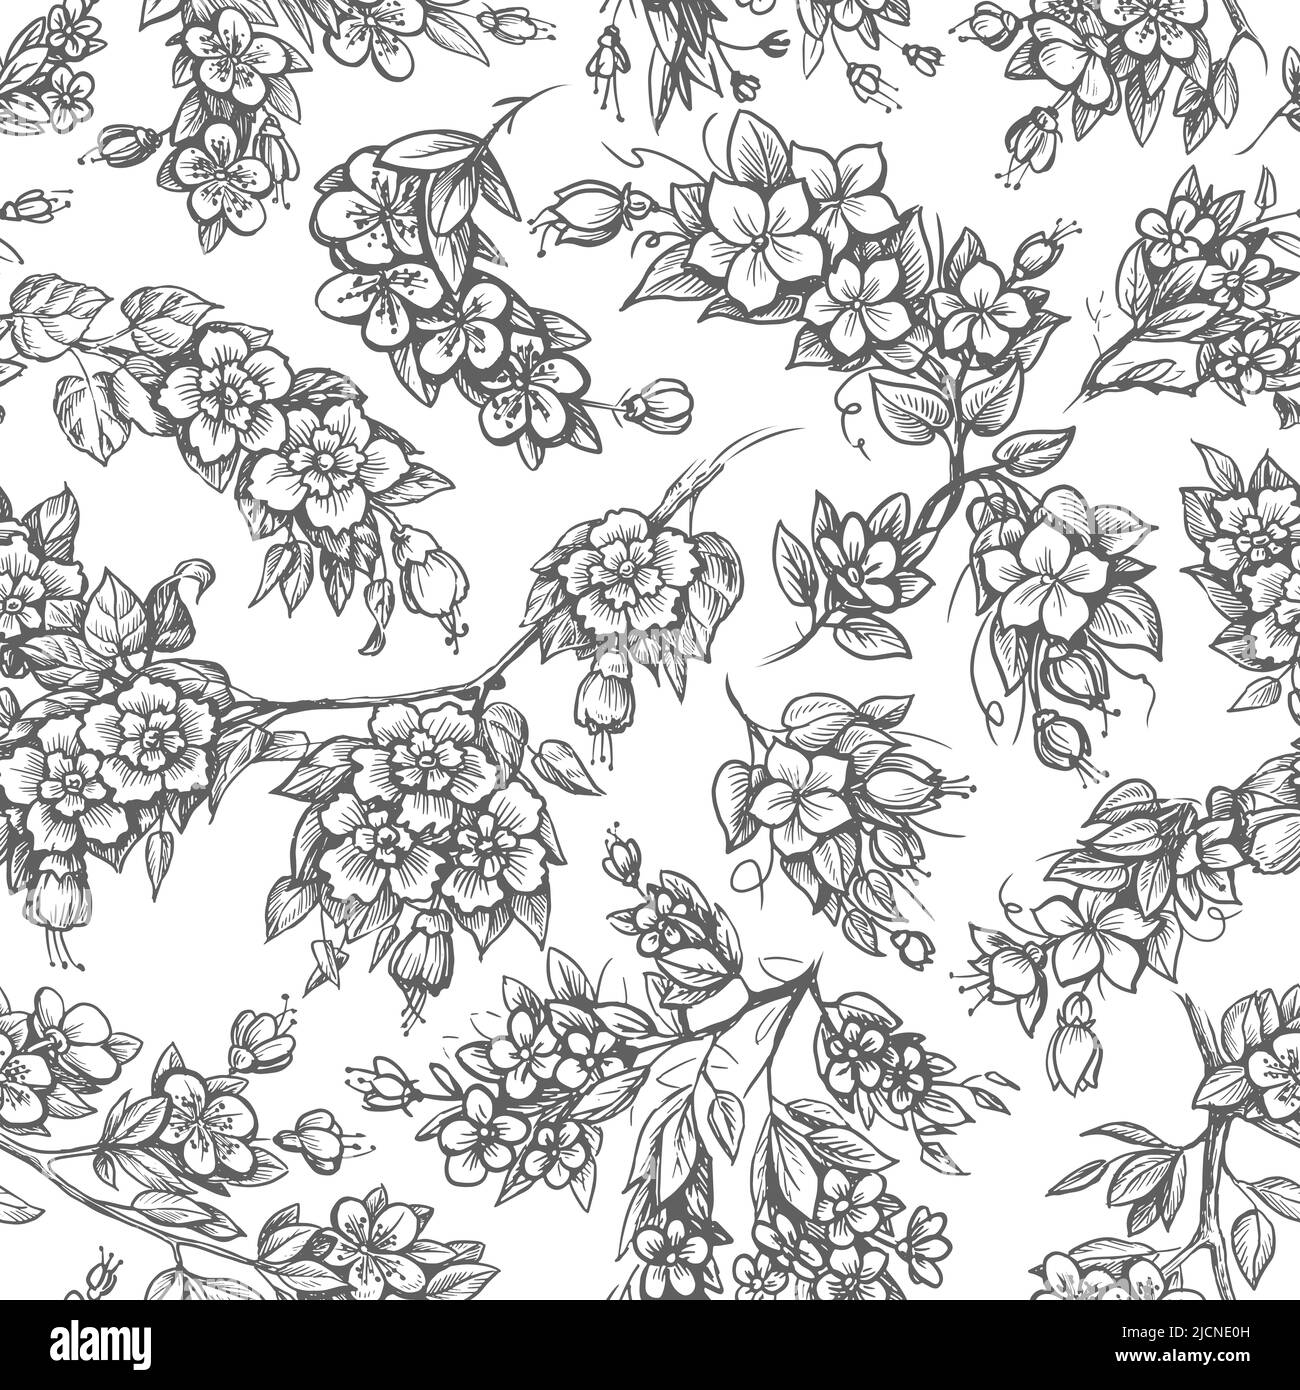 Floral seamless pattern. Flowers background drawn in vintage engraving style. Vector illustration Stock Vector